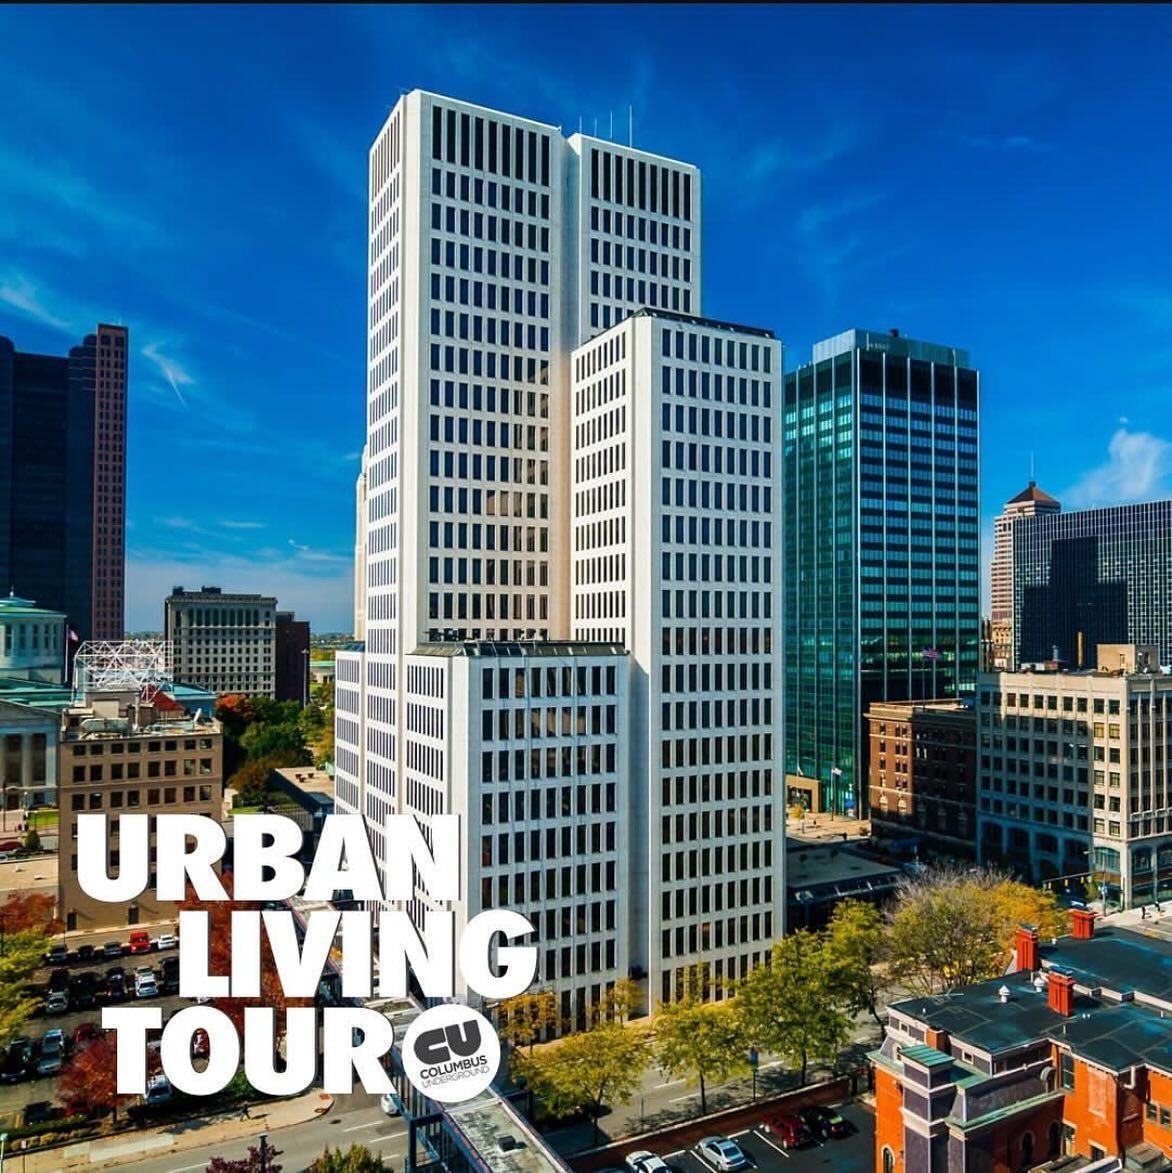 🏡 Giveaway Alert ‼️ 

We&rsquo;ve got a pair of tickets to this weekend&rsquo;s Urban Living Tour on Sunday, May 5 from 9am-5pm starting @prestoncentrecolumbus!

The Urban Living Tour is a self-guided open house of apartments, condos, and homes in D